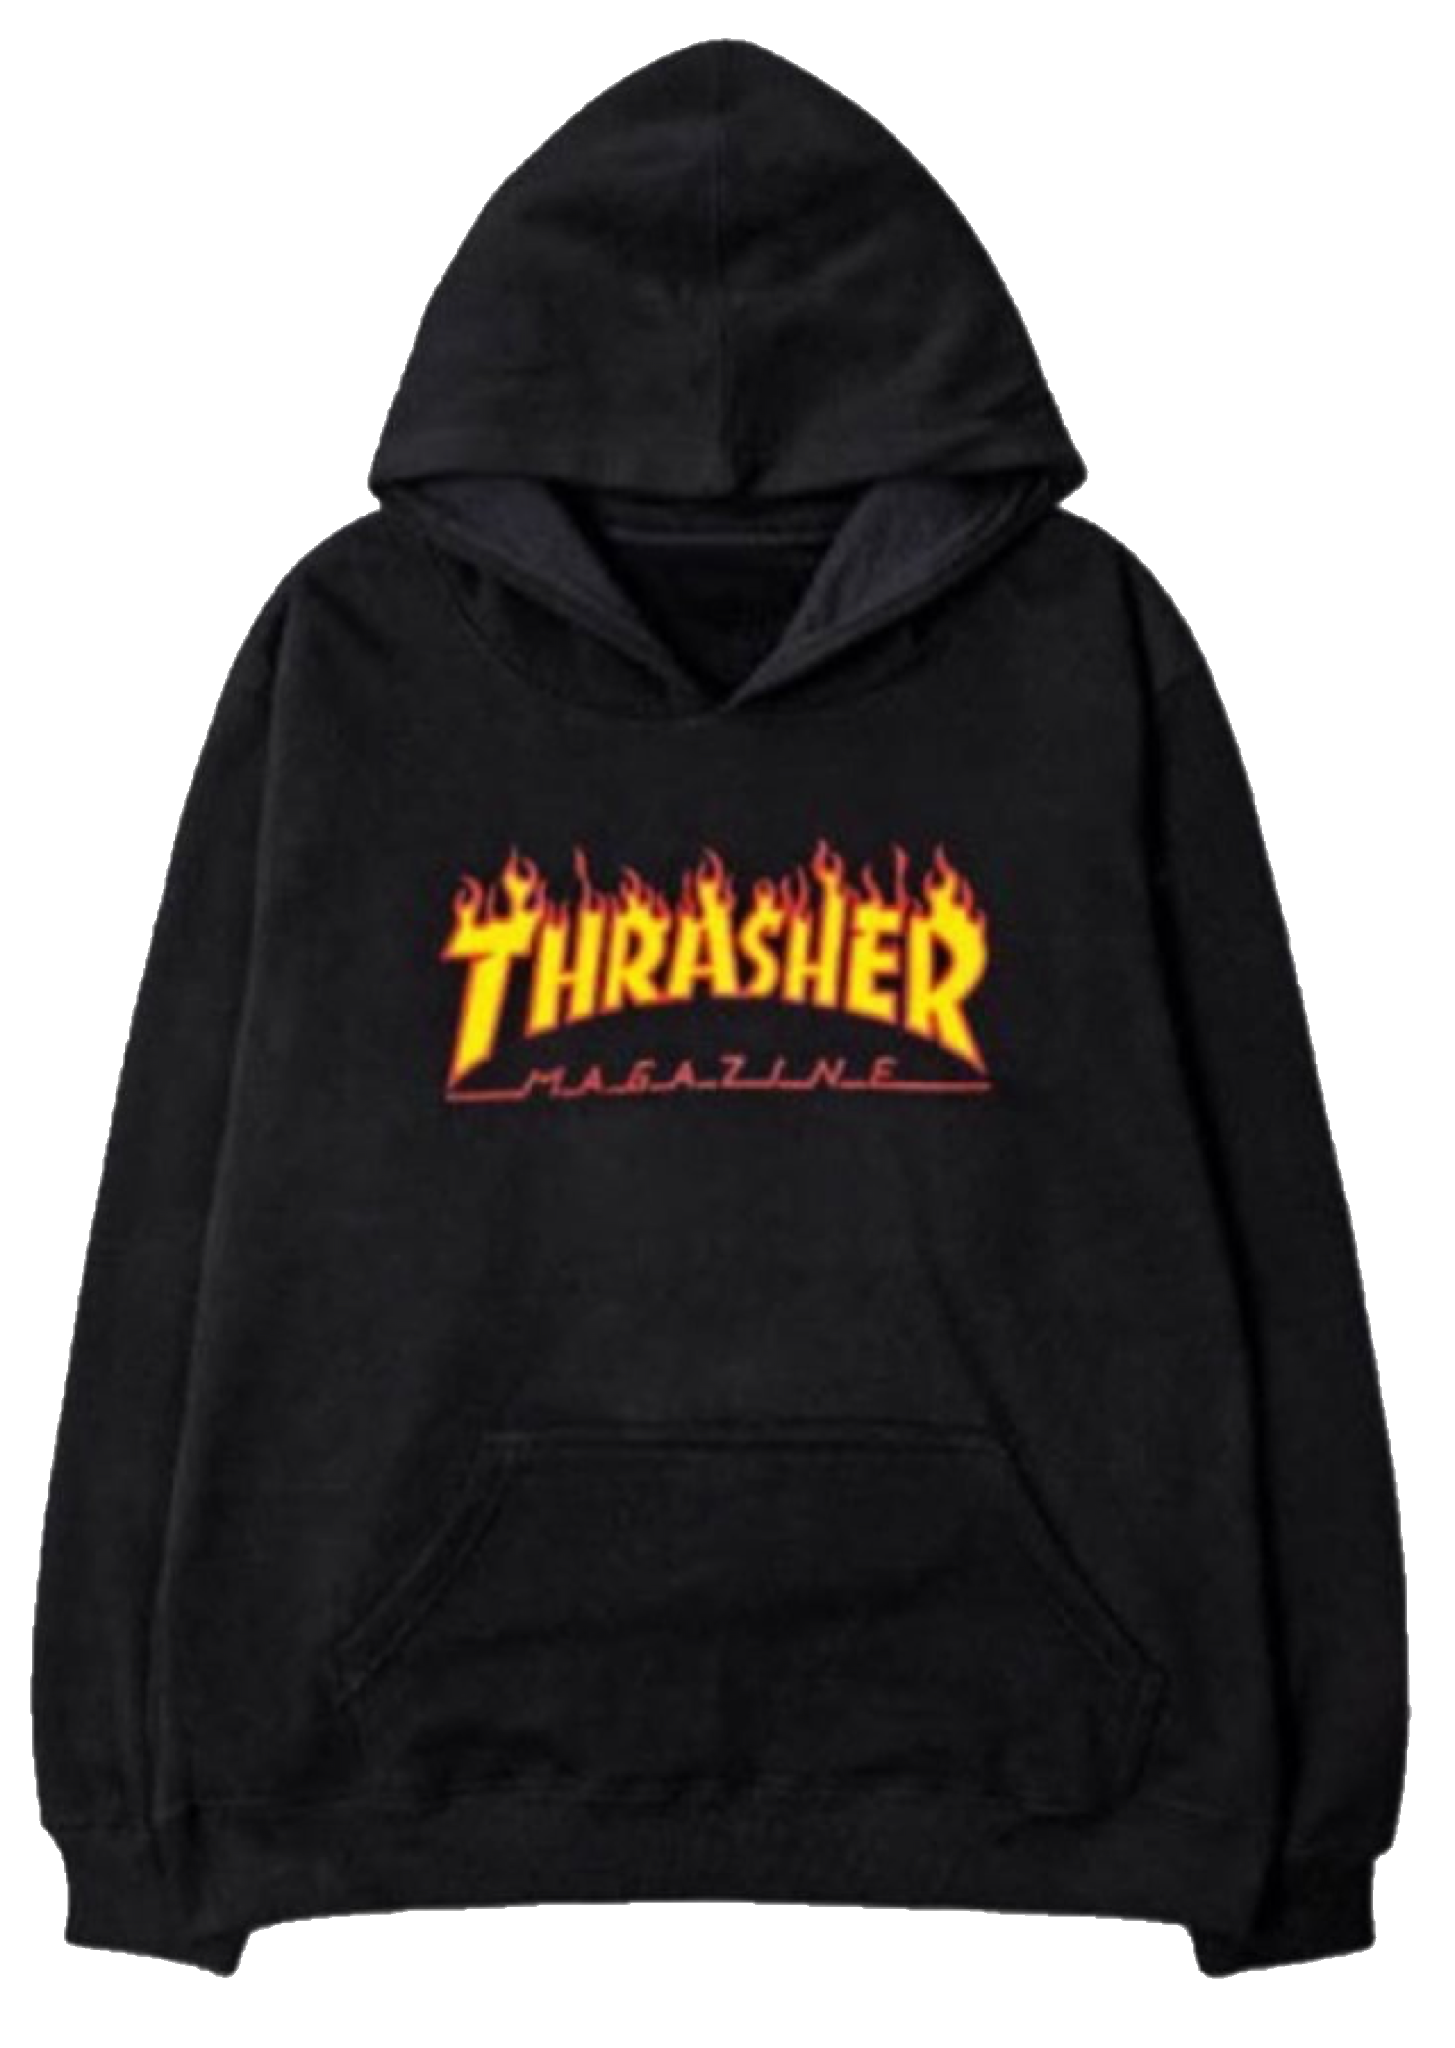 Trasher T-Shirt PNG Clipart